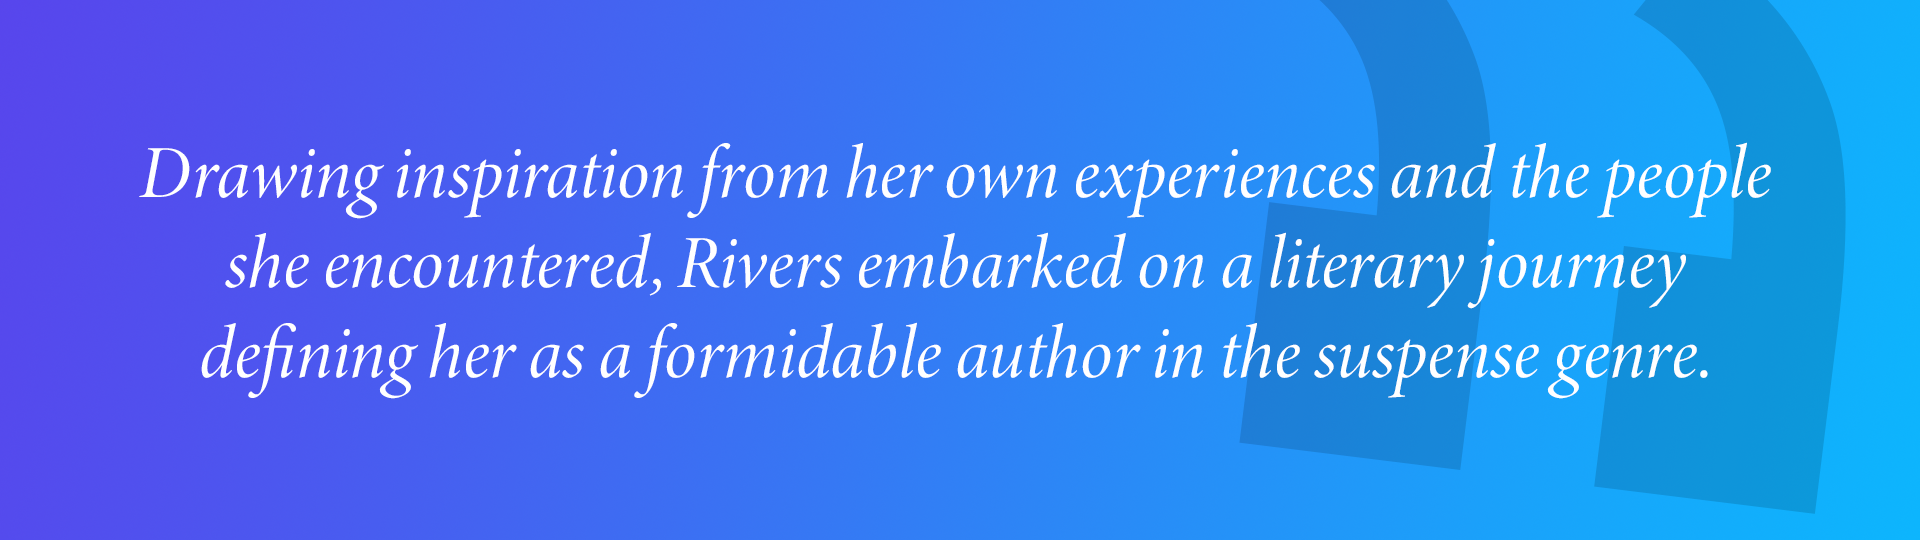 Drawing inspiration from her own experiences and the people she encountered, Rivers embarked on a literary journey
defining her as a formidable author in the suspense genre.